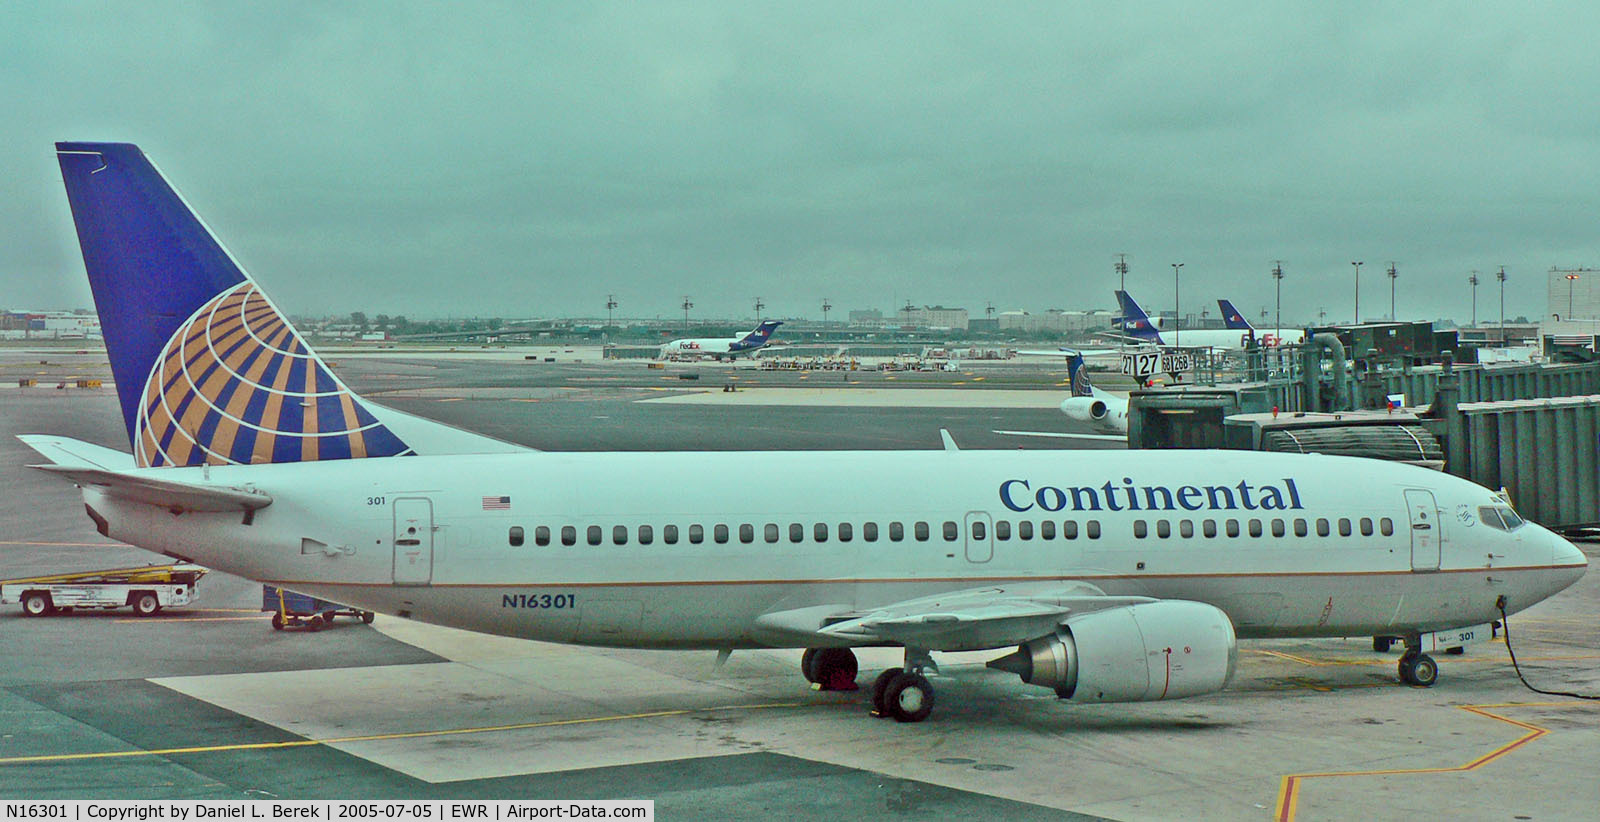 N16301, 1985 Boeing 737-3TO C/N 23352, One of Continental's many 737-300s takes a break at Newark.